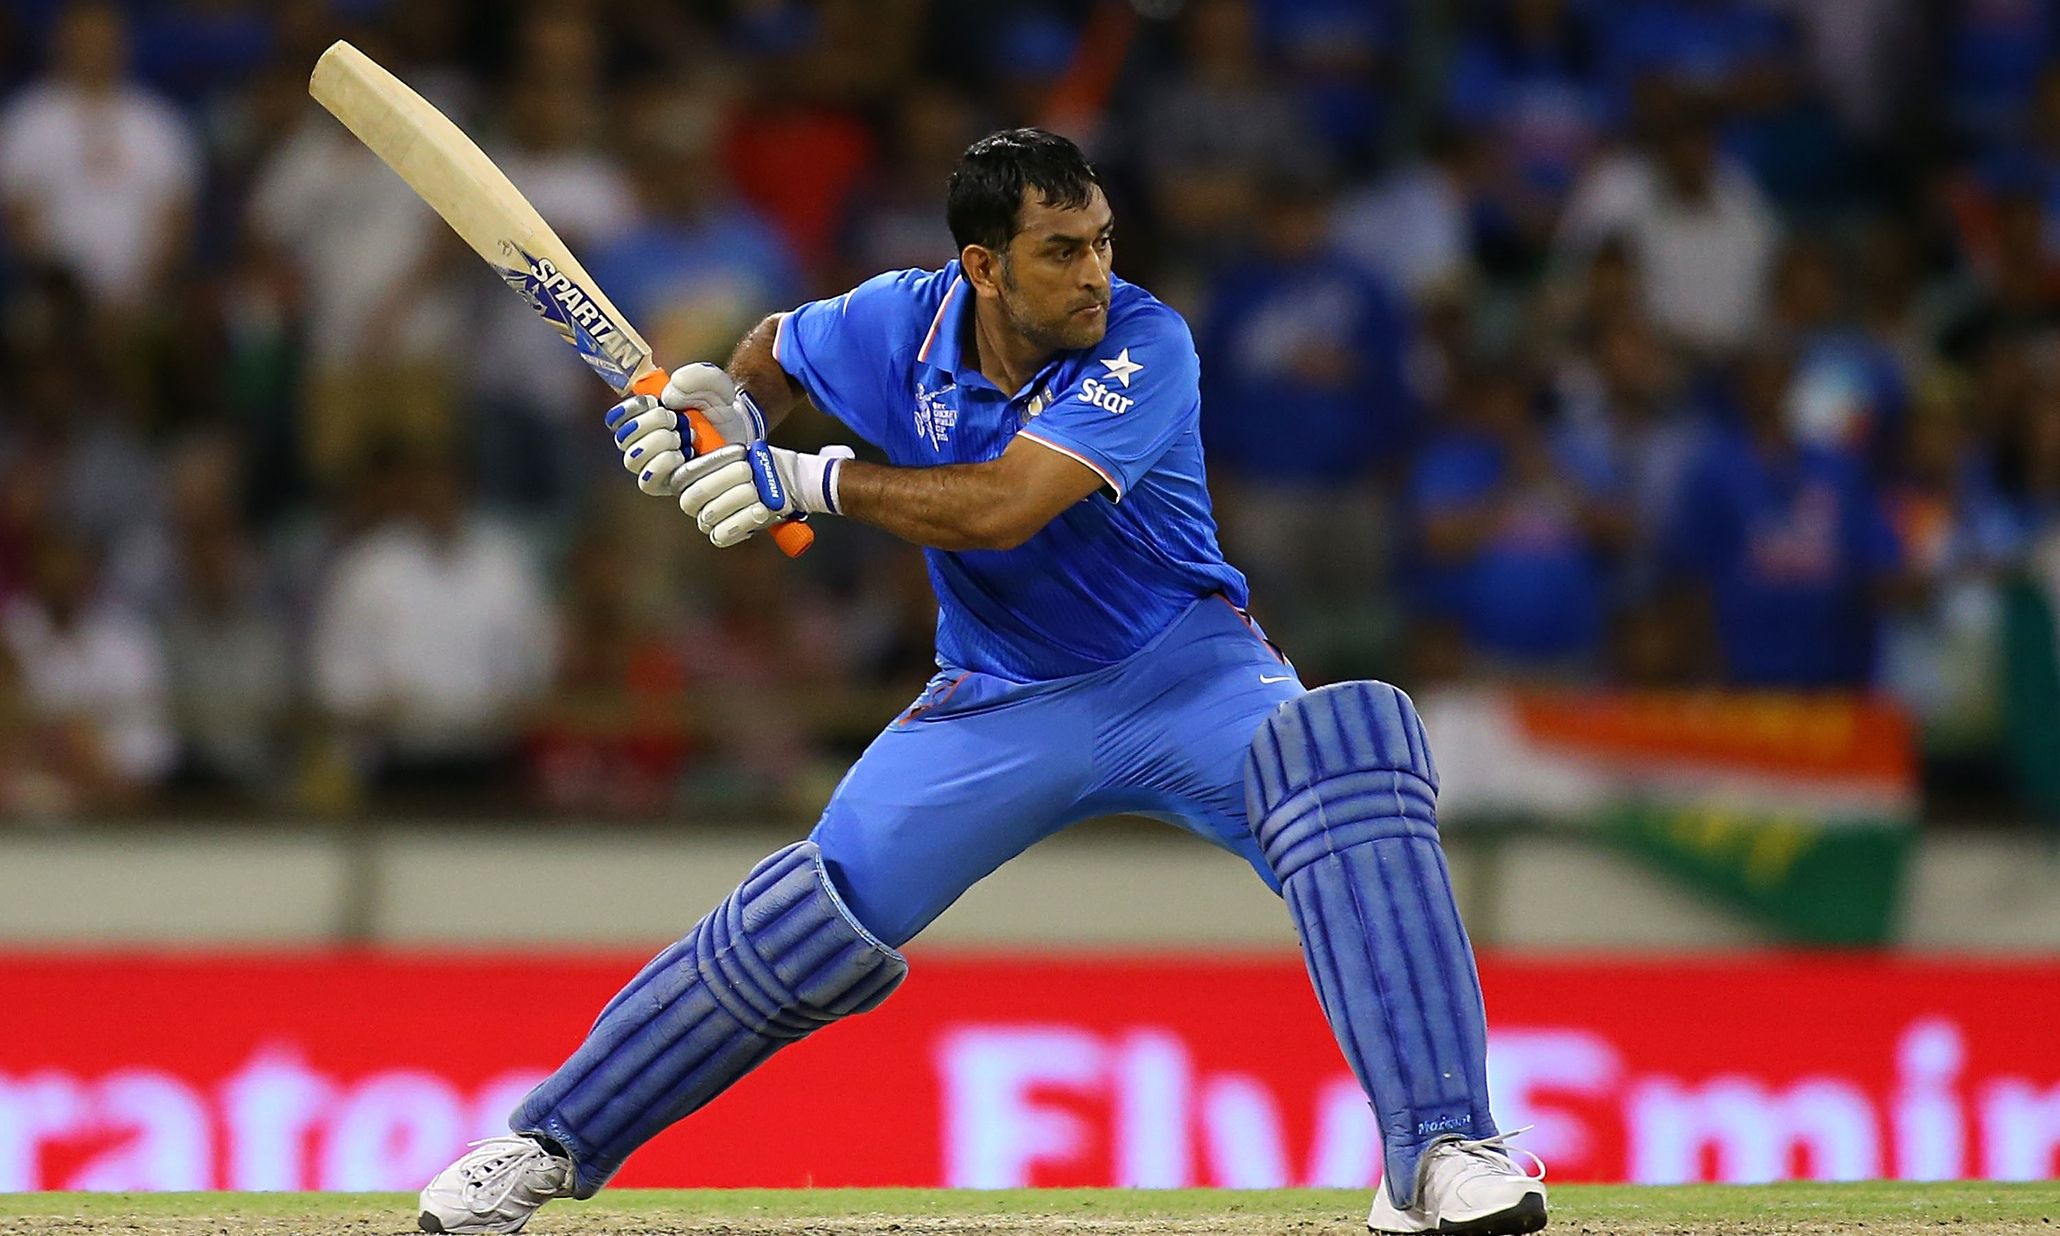 Ms Dhoni PC Wallpapers - Wallpaper Cave